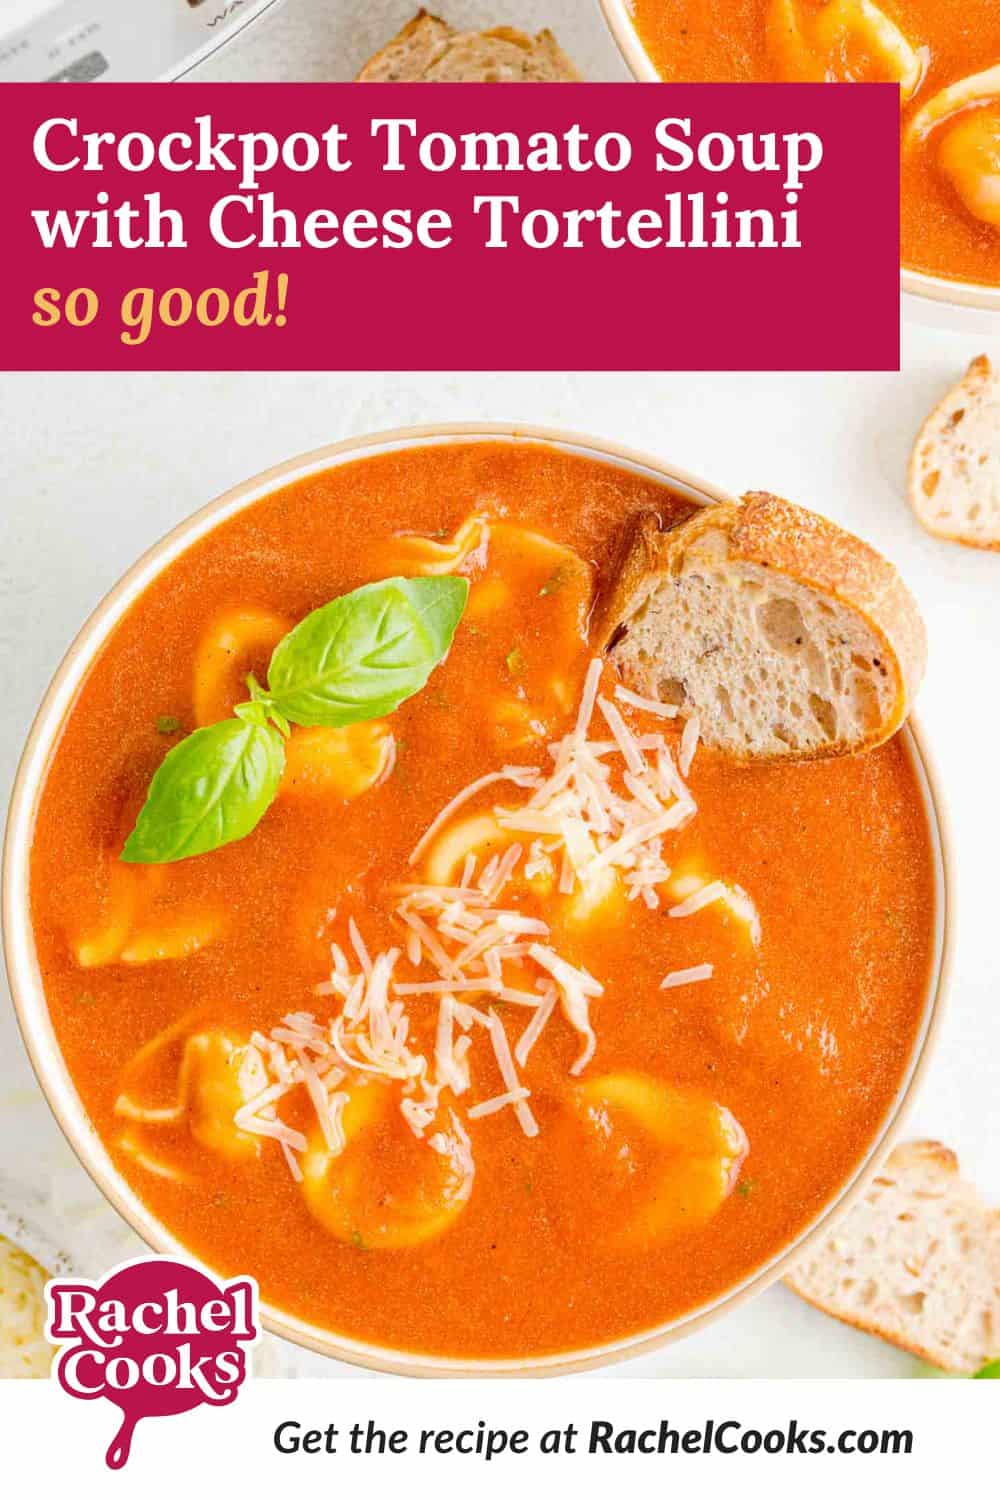 Crockpot tomato soup Pinterest graphic with text and images.